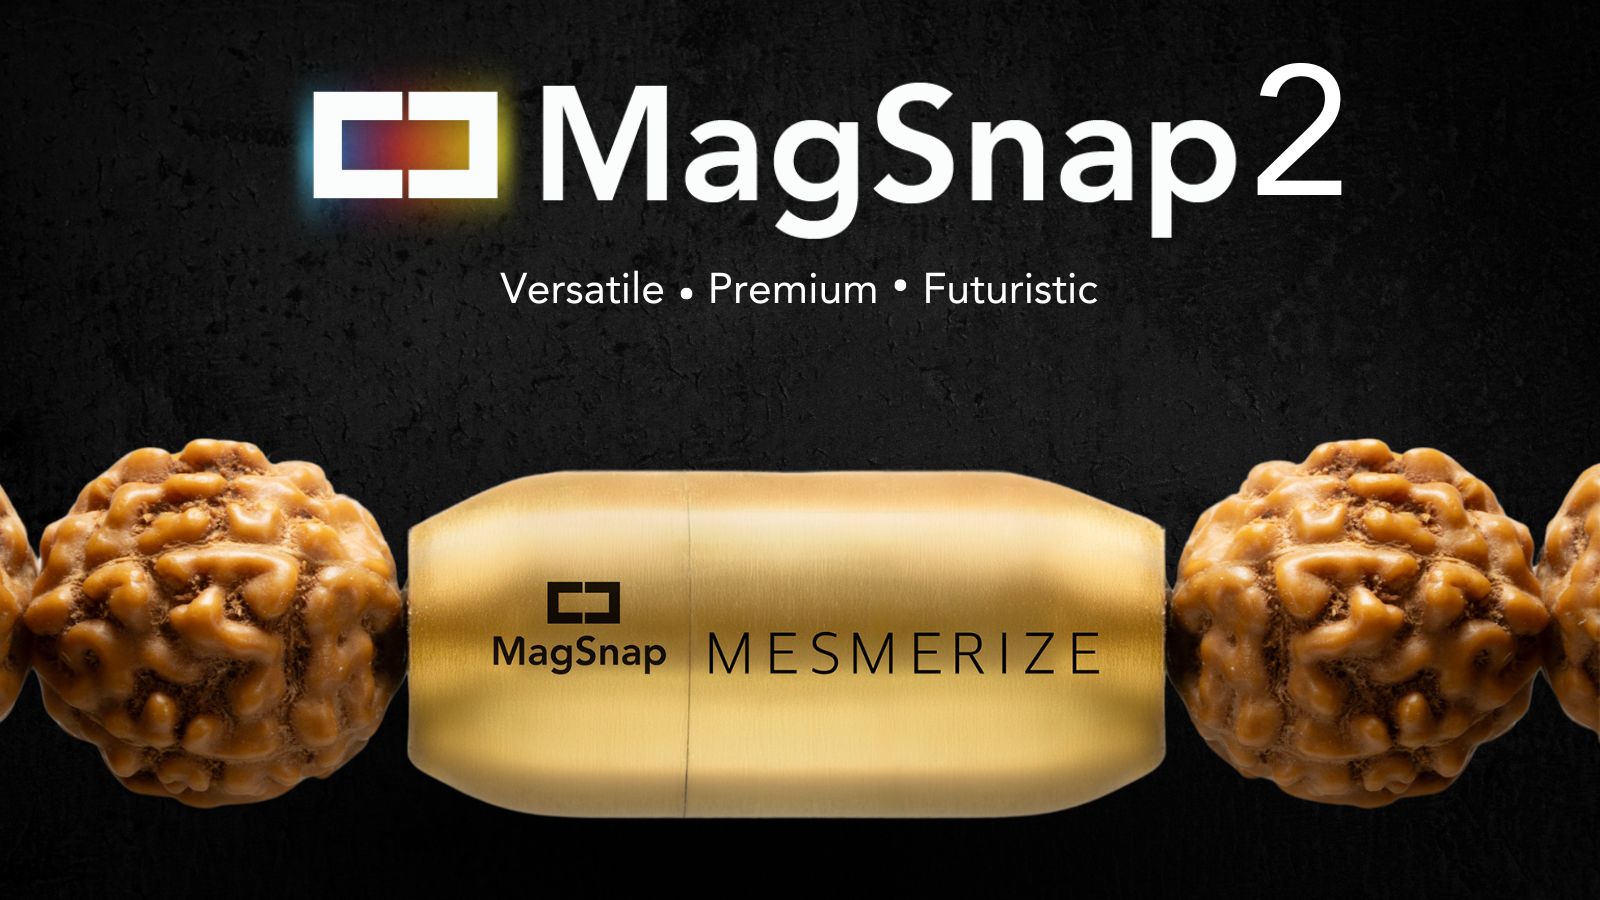 The Bracelet Revolution is Here: Presenting MagSnap 2!